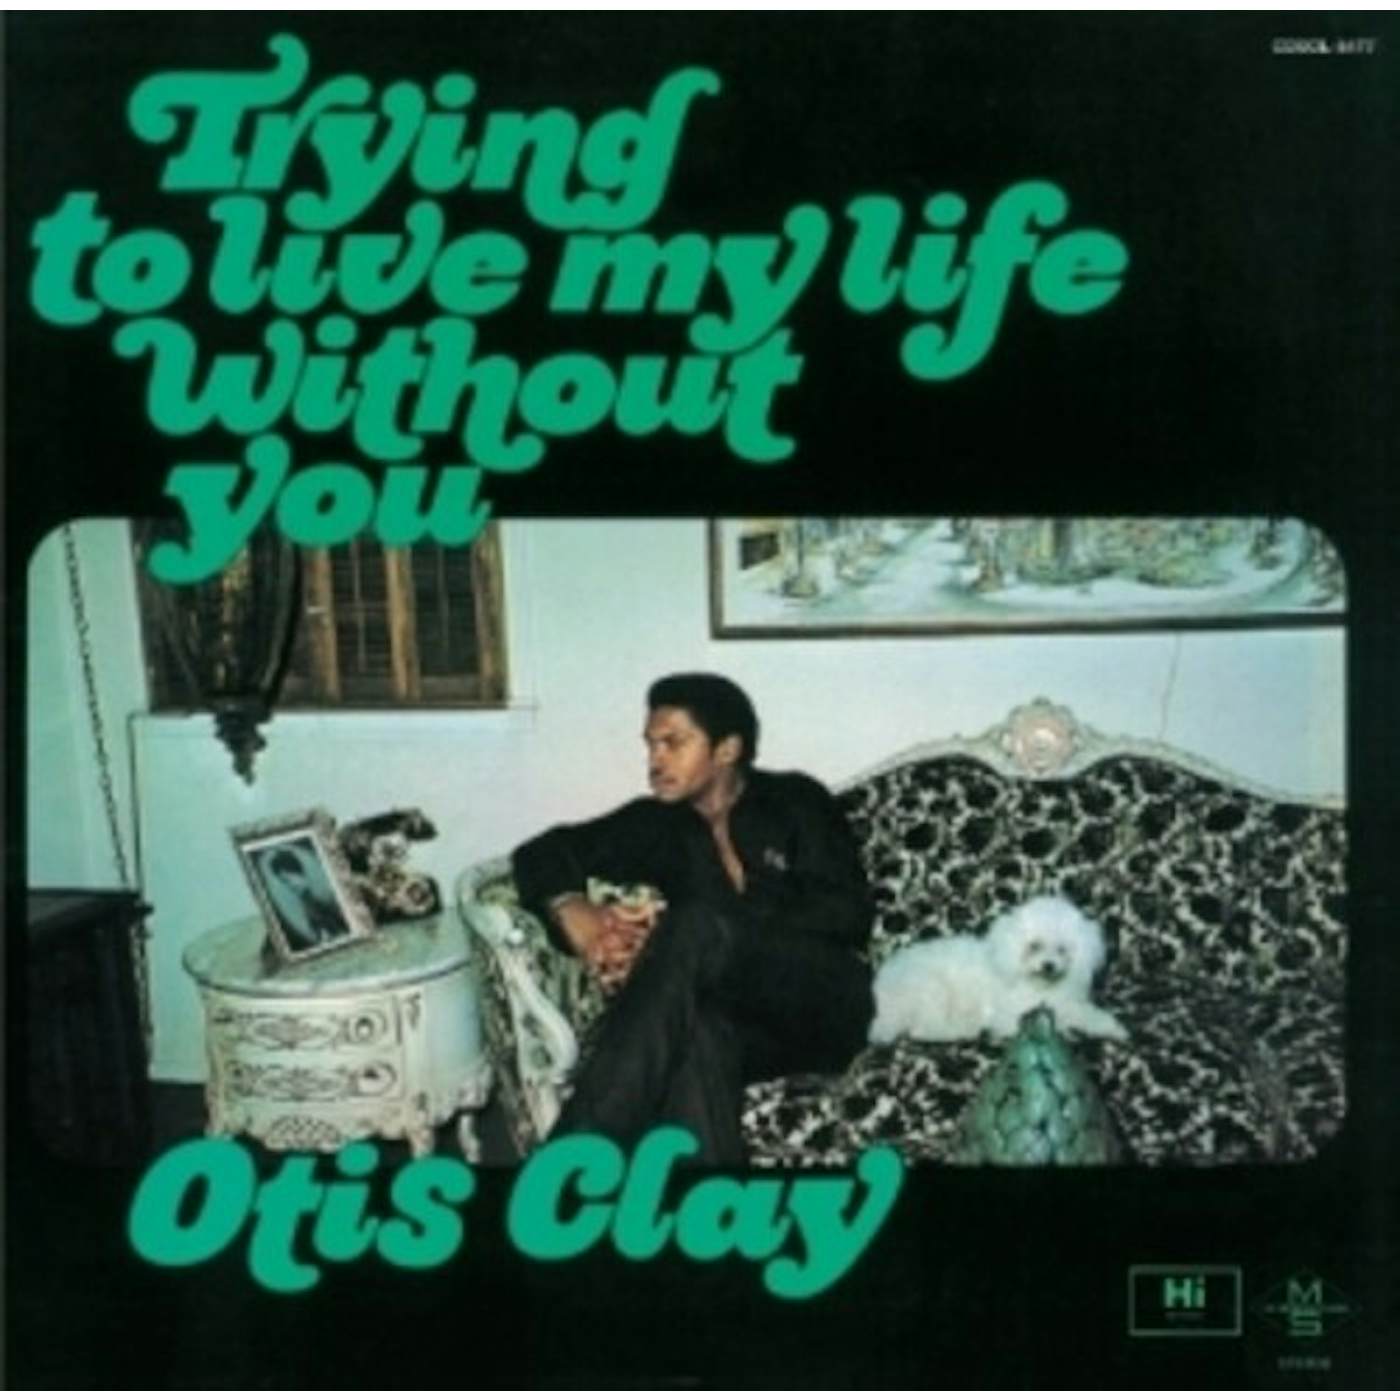 Otis Clay TRYING TO LIVE MY LIFE WITHOUT YOU CD